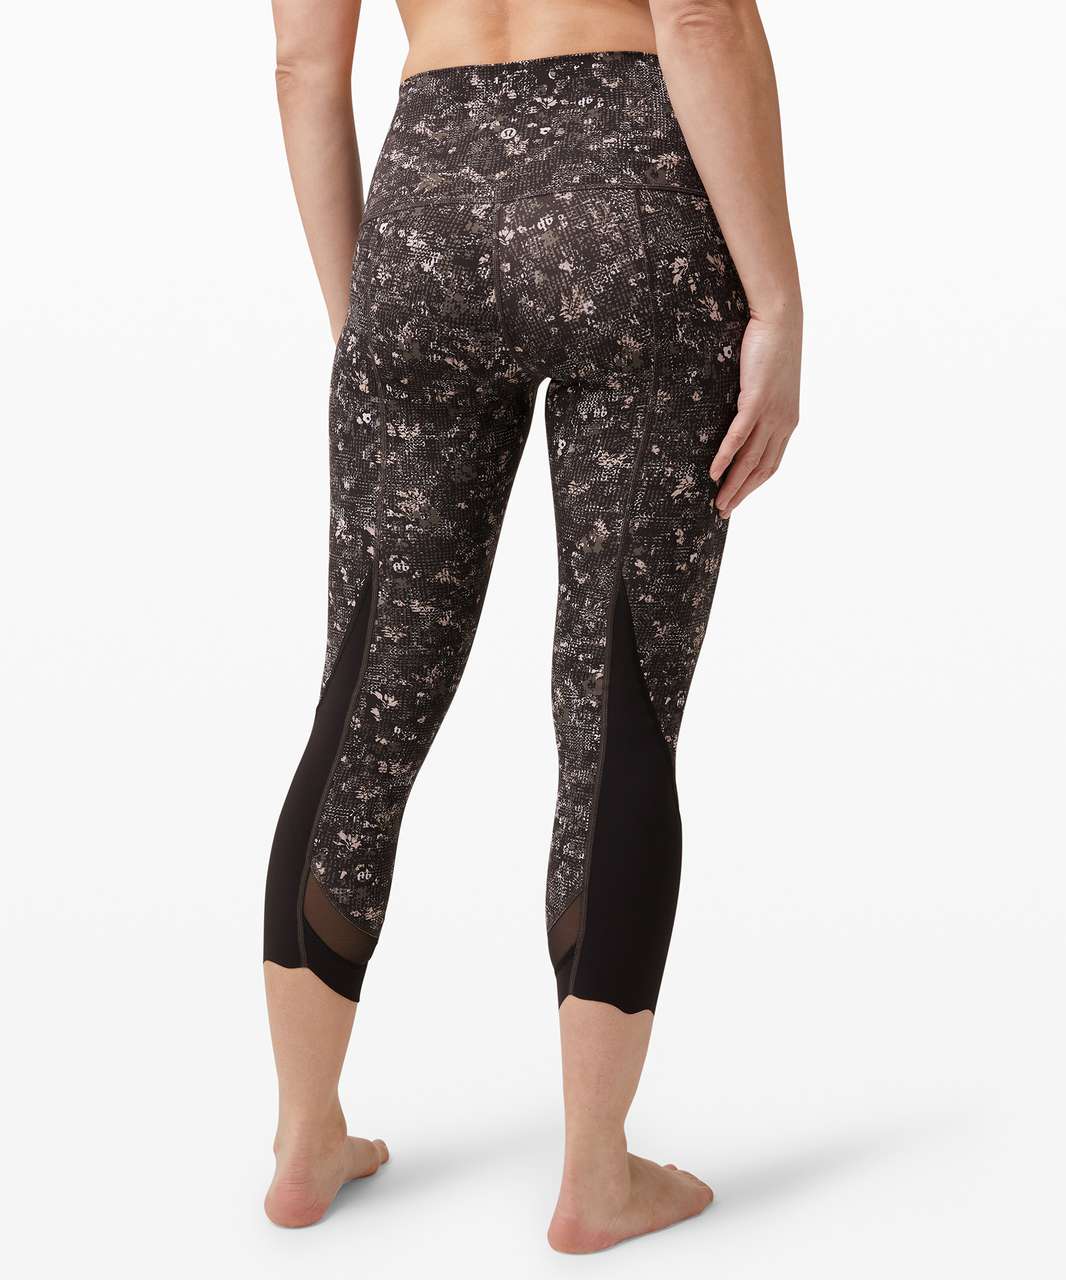 Lululemon Wunder Under Crop High-Rise *Roll Down Scallop Full-On Luxtreme 23" - Equalized Multi